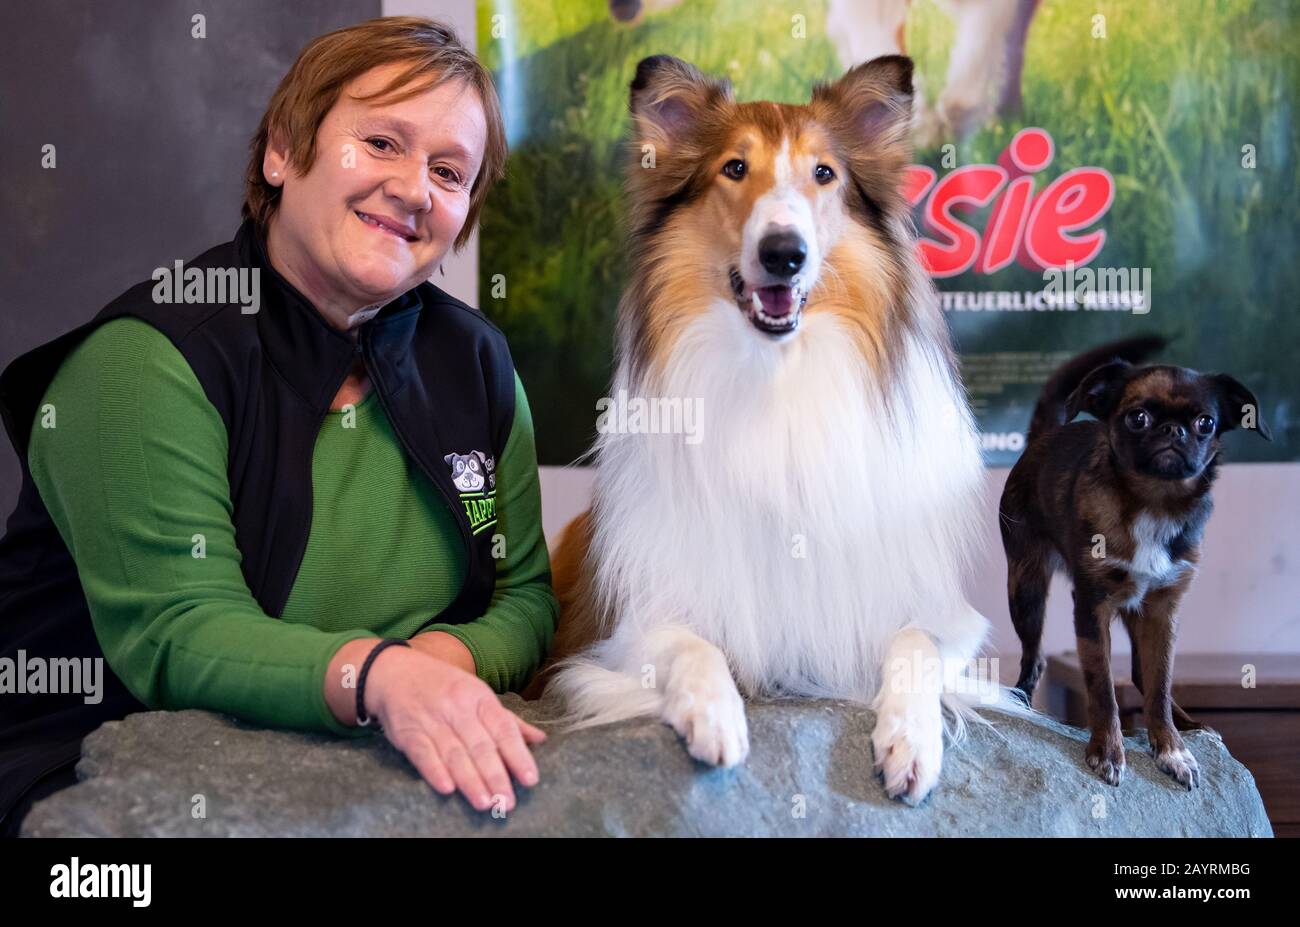 Wang Germany 29th Jan 2020 Renate Hiltl Film Animal Trainer And The Film Dogs Bandit M And Mokka Taken At The Film Animal Ranch Bandit Plays In The Movie Lassie An